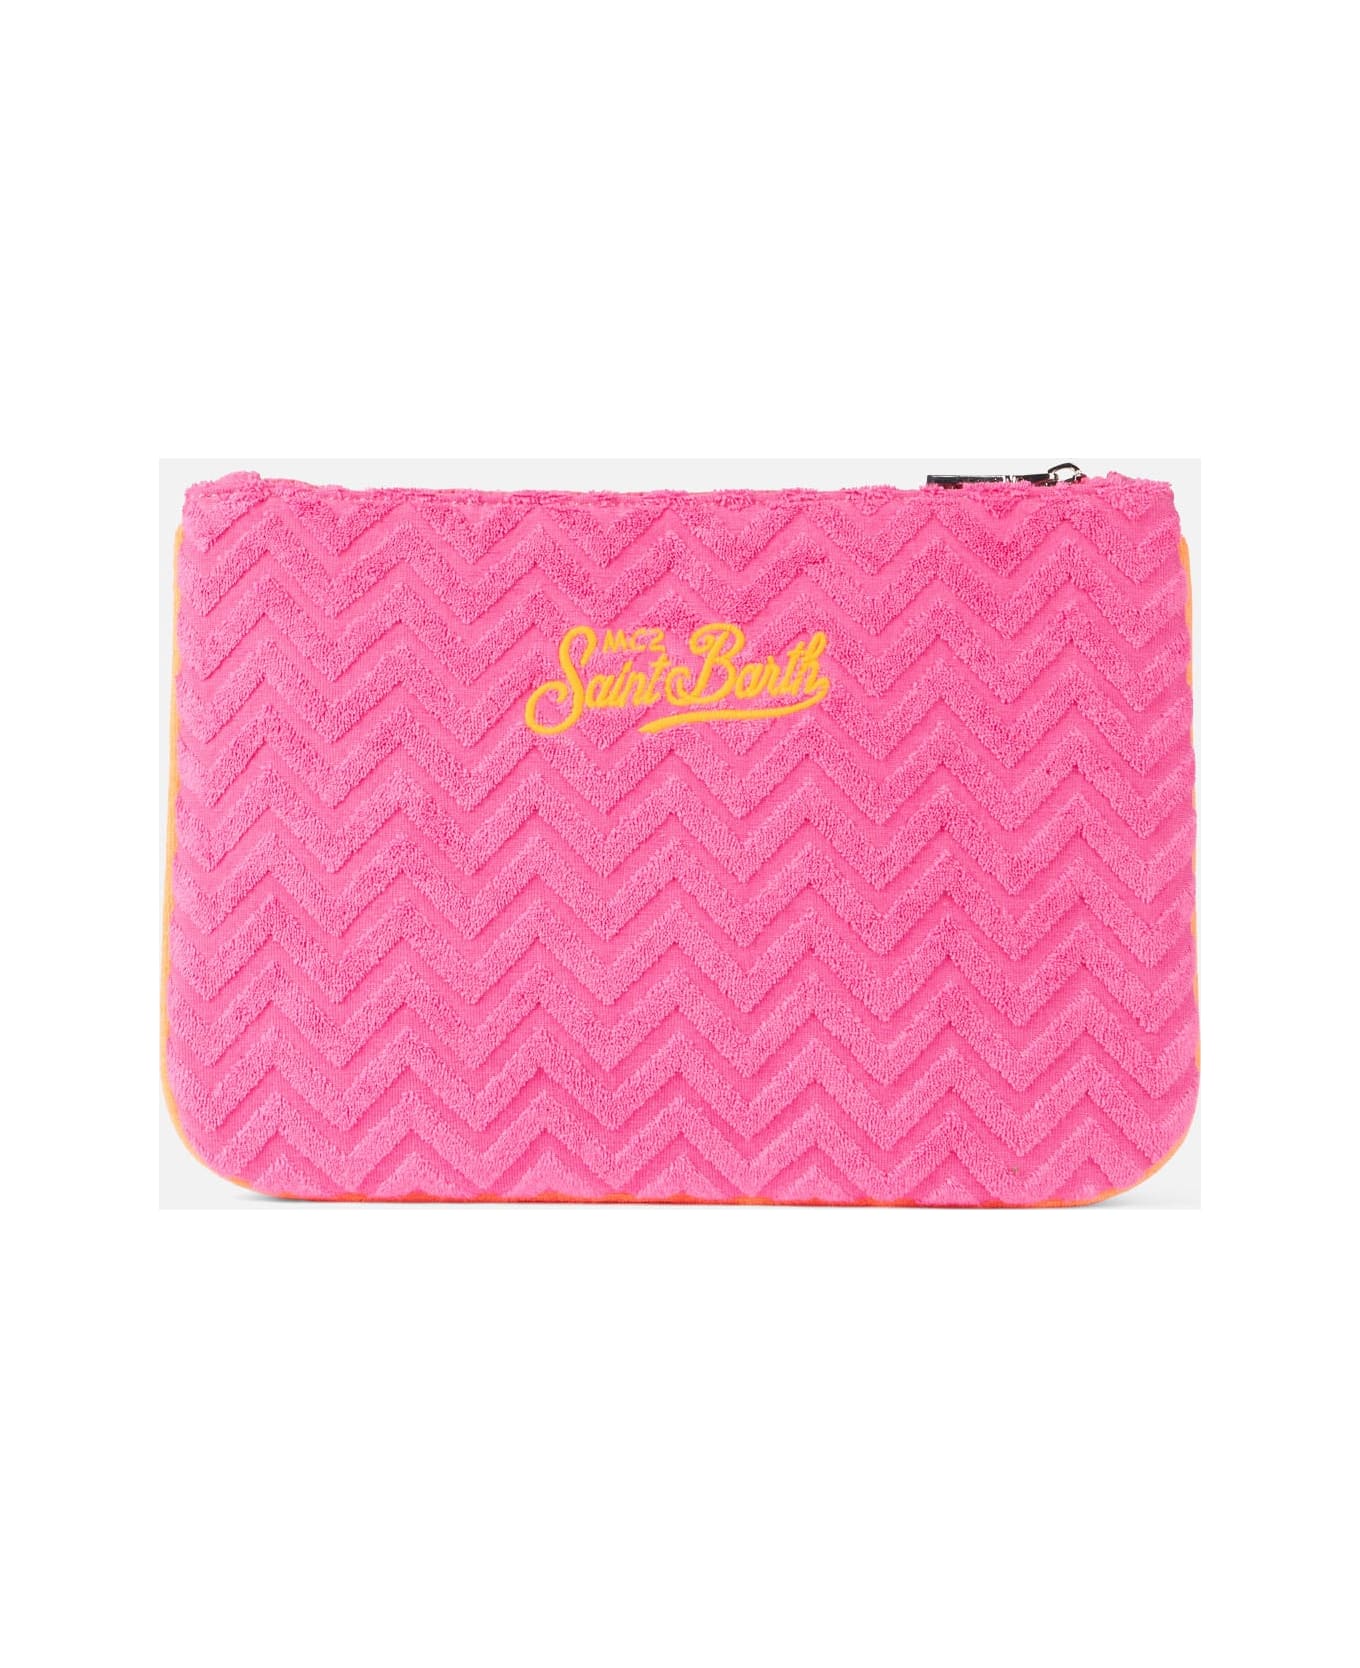 MC2 Saint Barth Parisienne Terry Pochette With Embossed Pattern - PINK クラッチバッグ